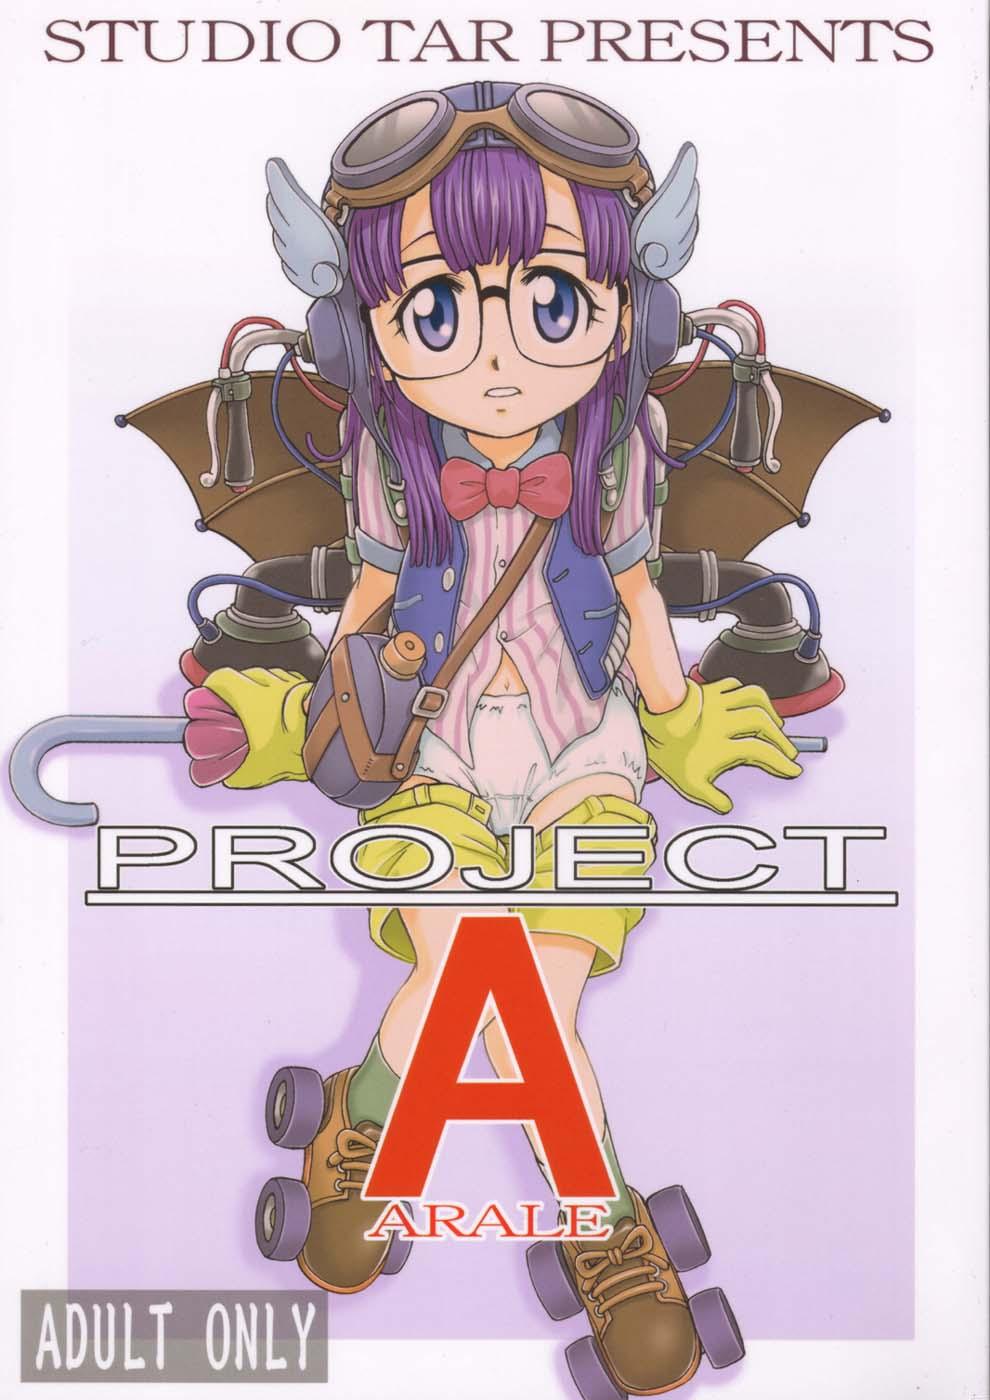 Project Arale 0